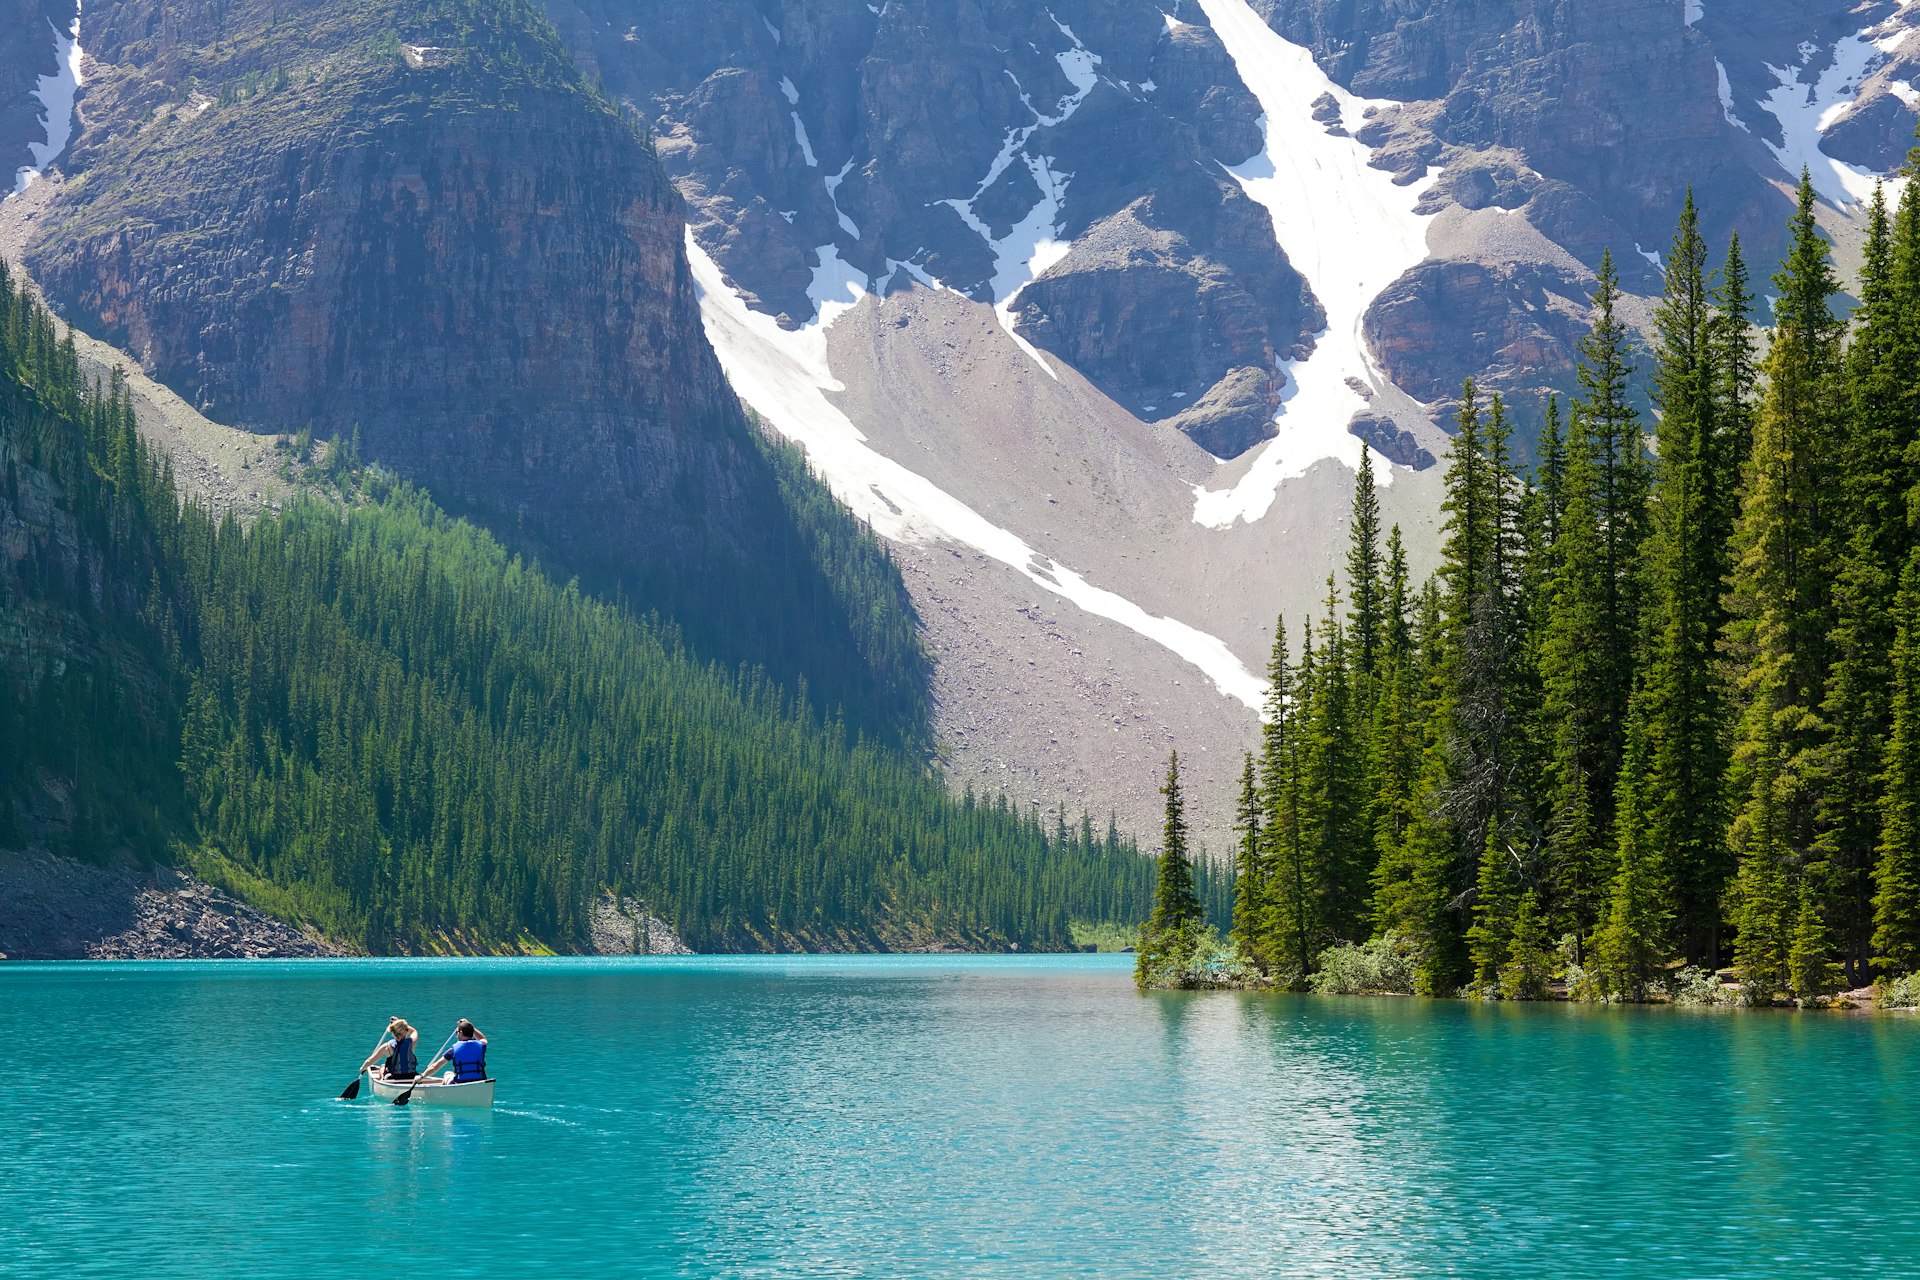 Boaters on a turquoise lake surrounded by mountains in Banff National Park